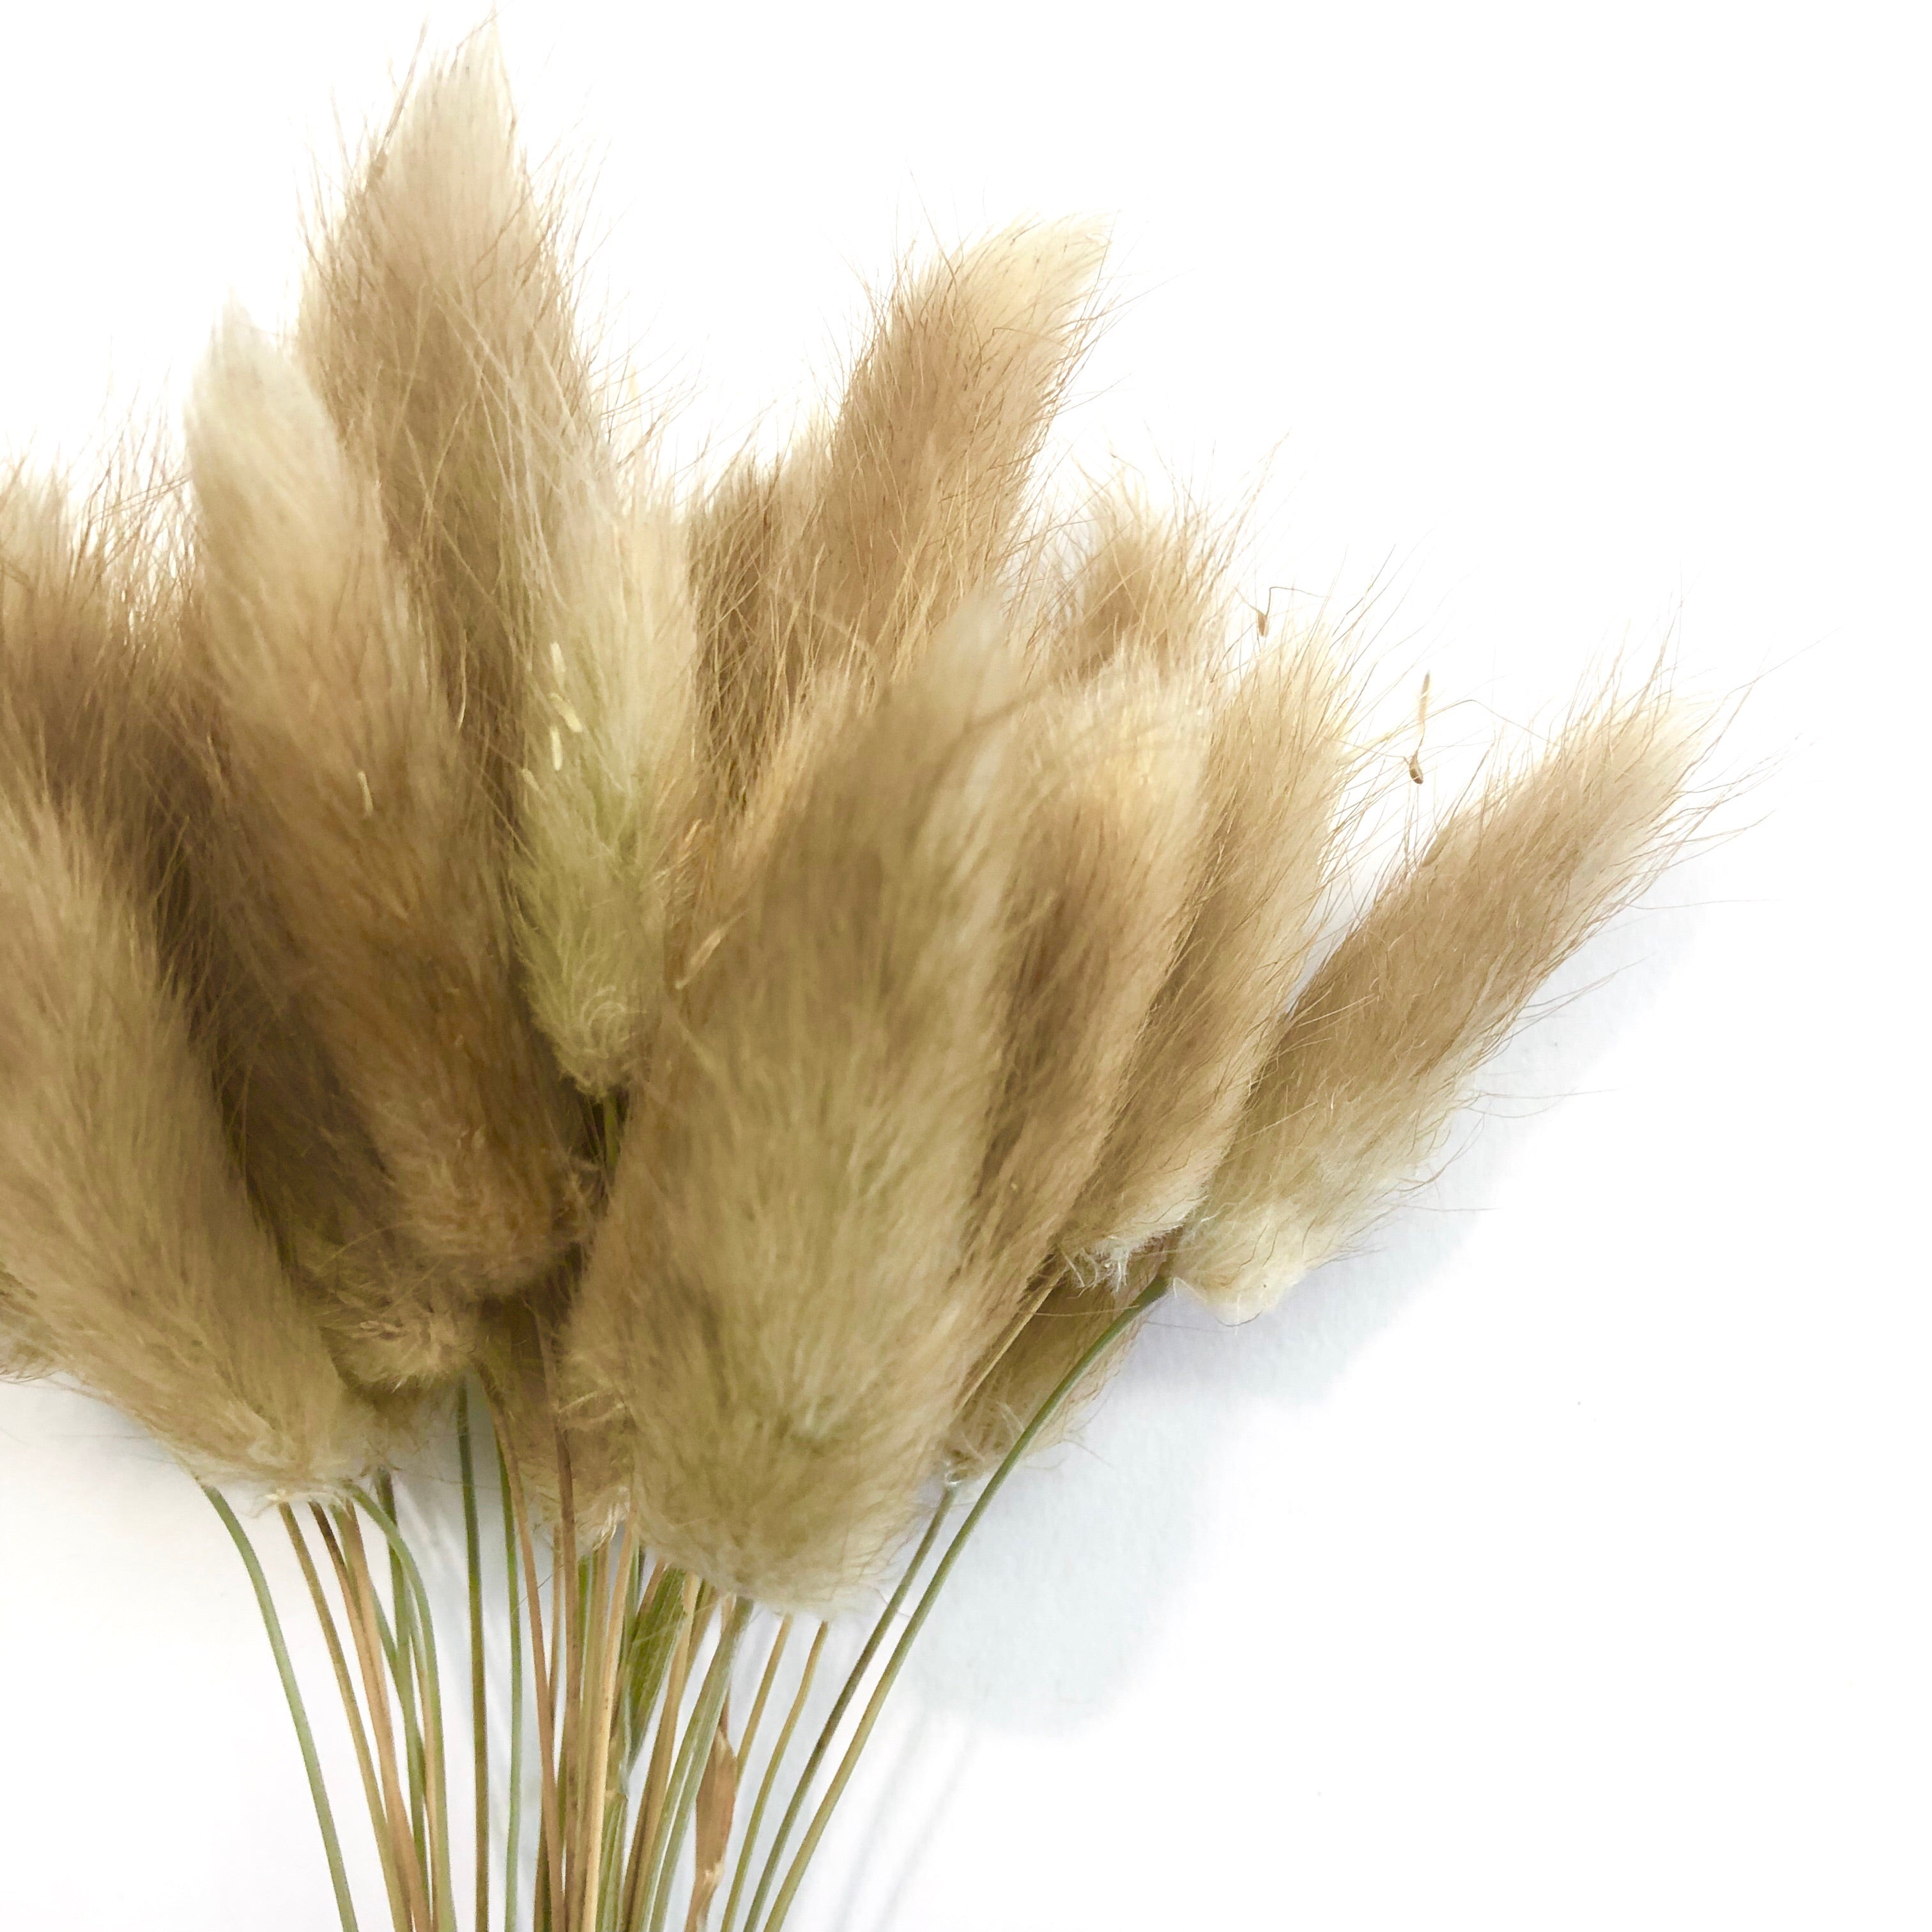 Natural Dried Rabbit Tail Grass Flower Stem Bunch - Primary Brown